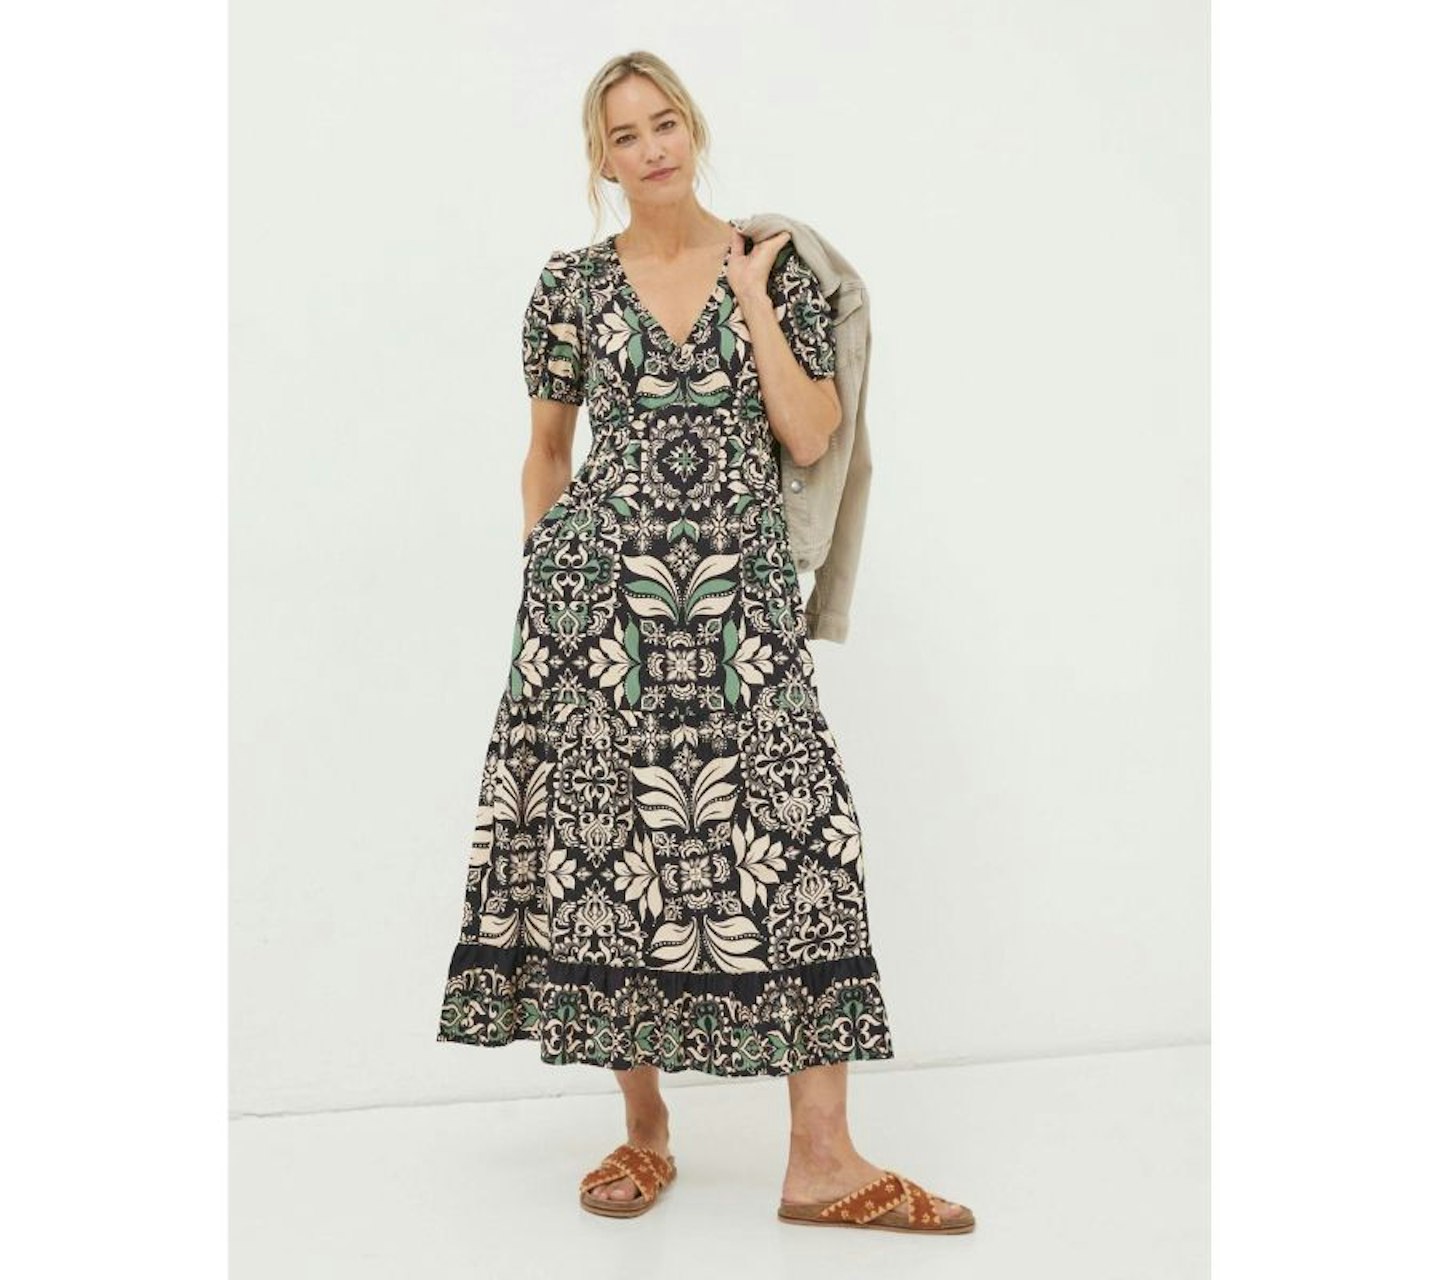 M&S FATFACE - dresses for over 50s